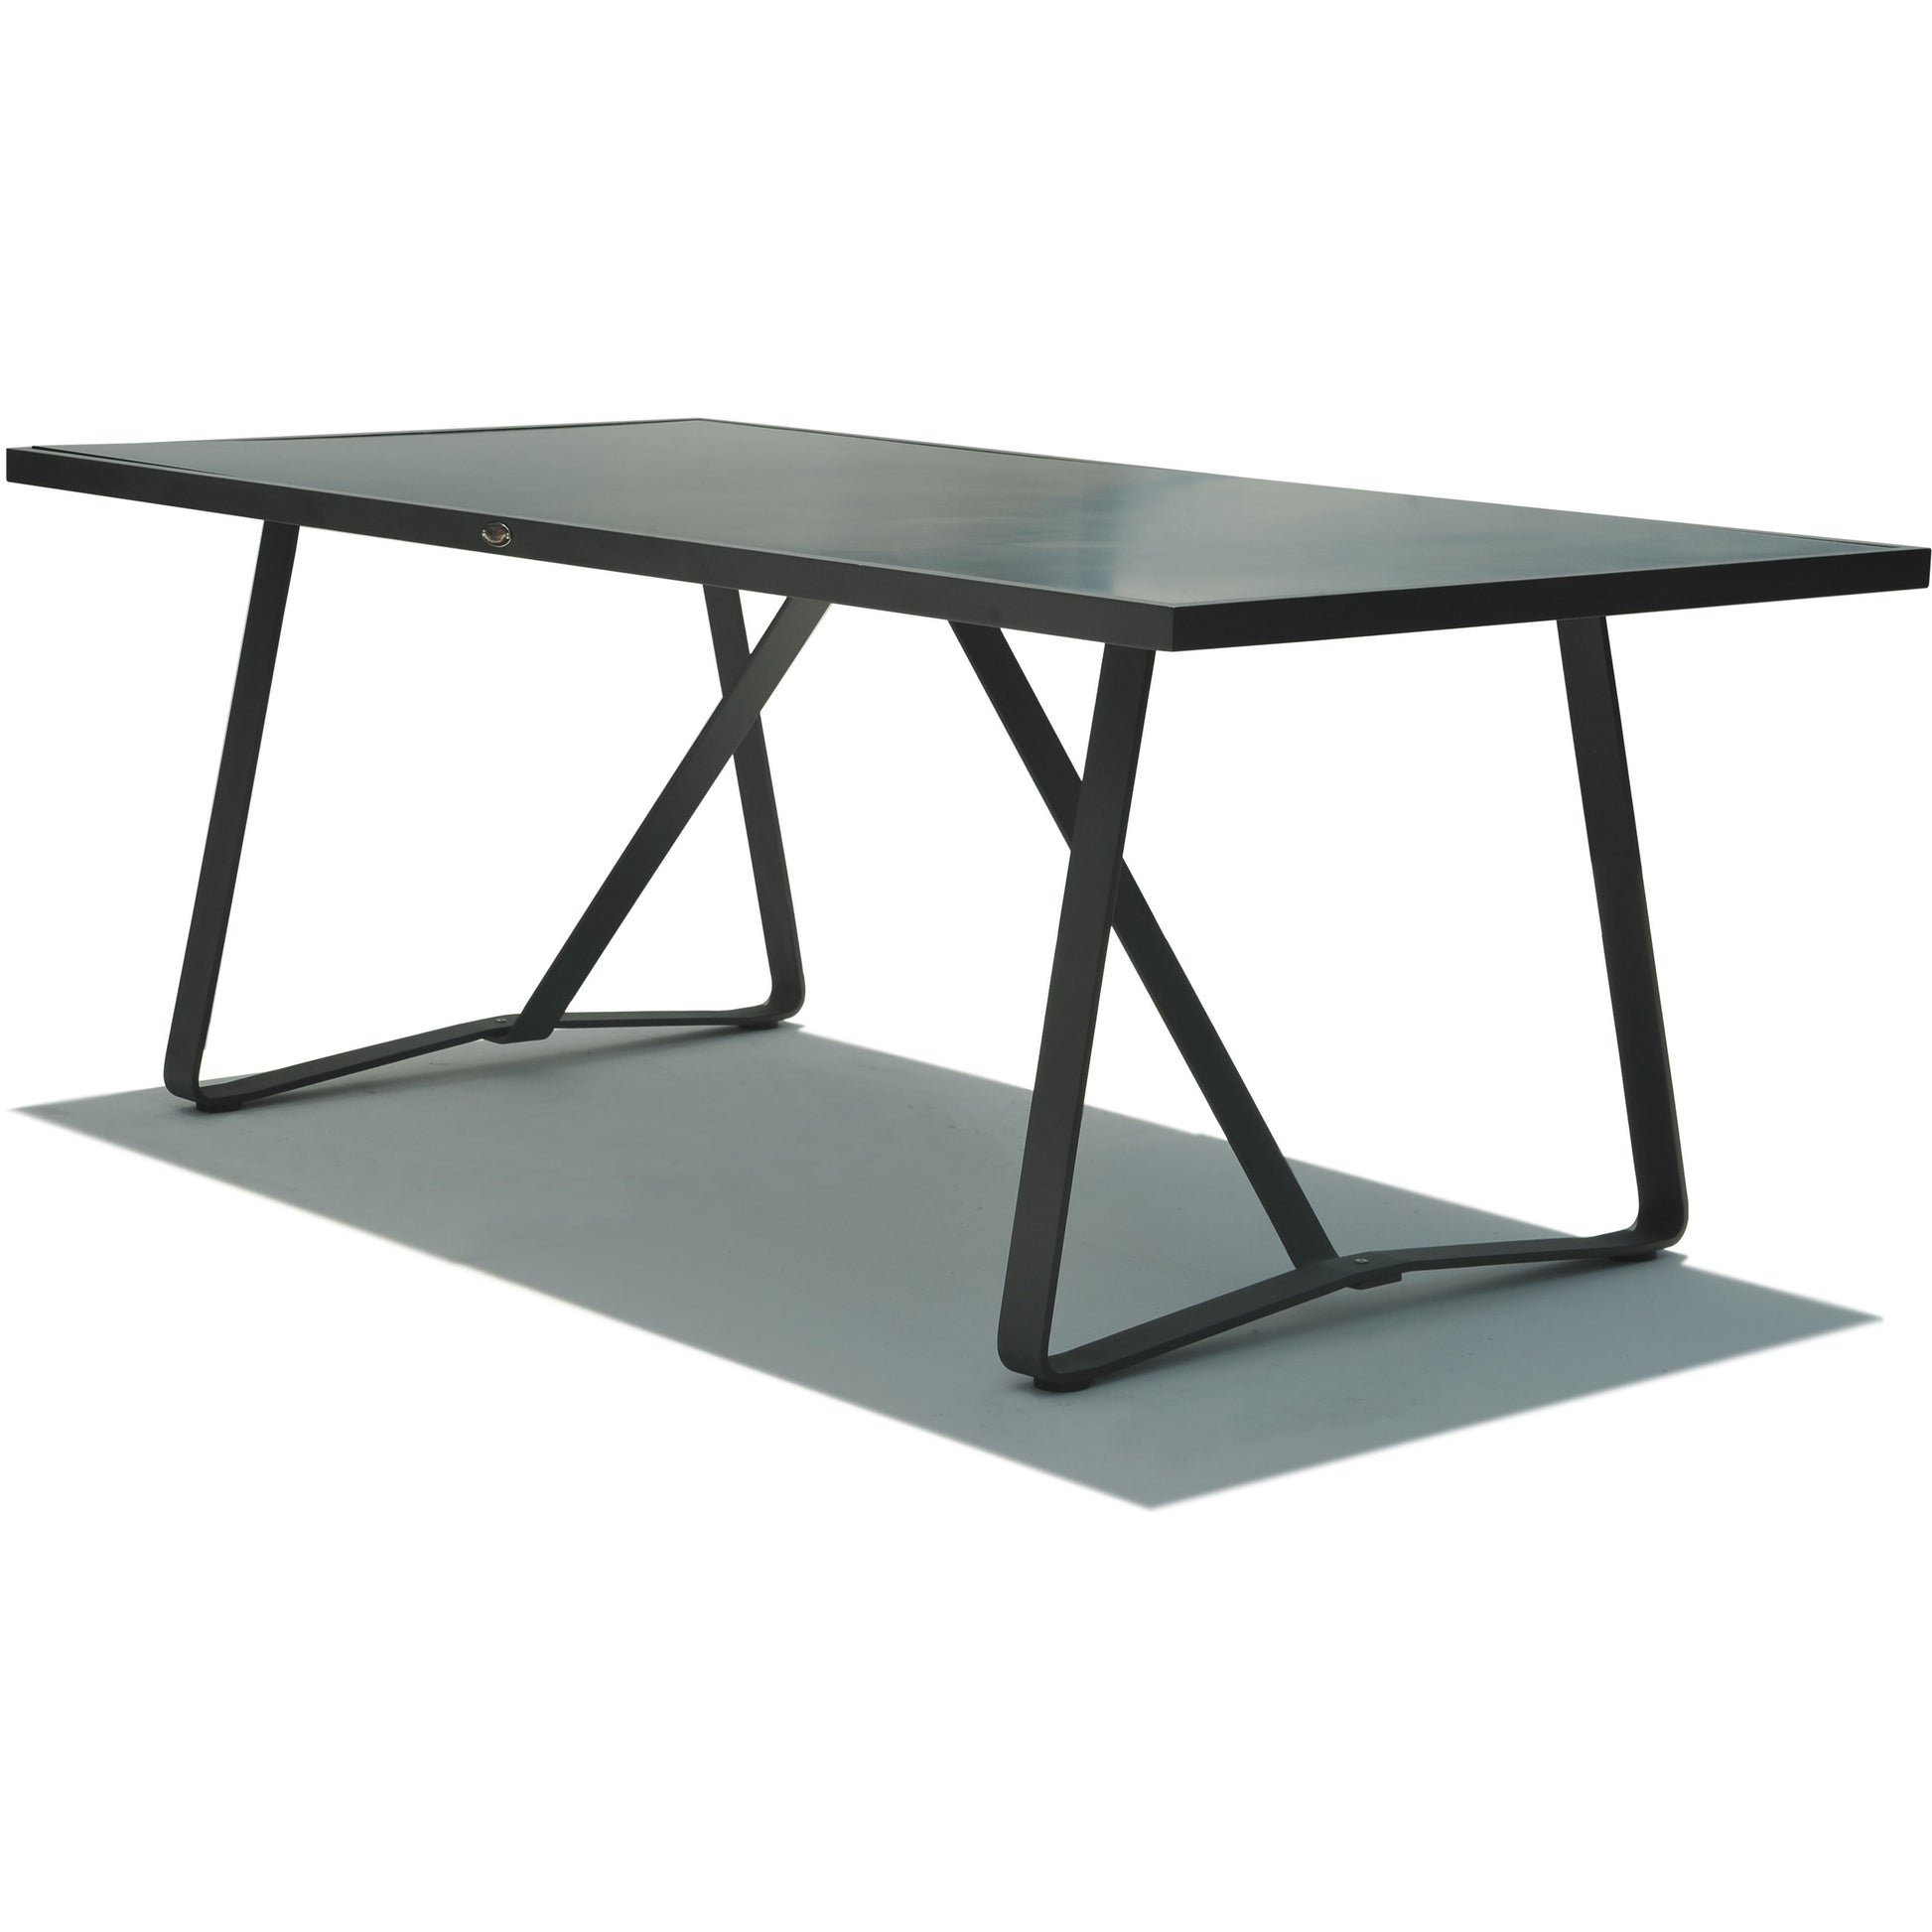 Horizon Rectangle Table (6 Seater or 8 Seater) - PadioLiving - Horizon Rectangle Table (6 Seater or 8 Seater) - Outdoor Dining Table - 6 Seater (200cm x 100cm) - PadioLiving